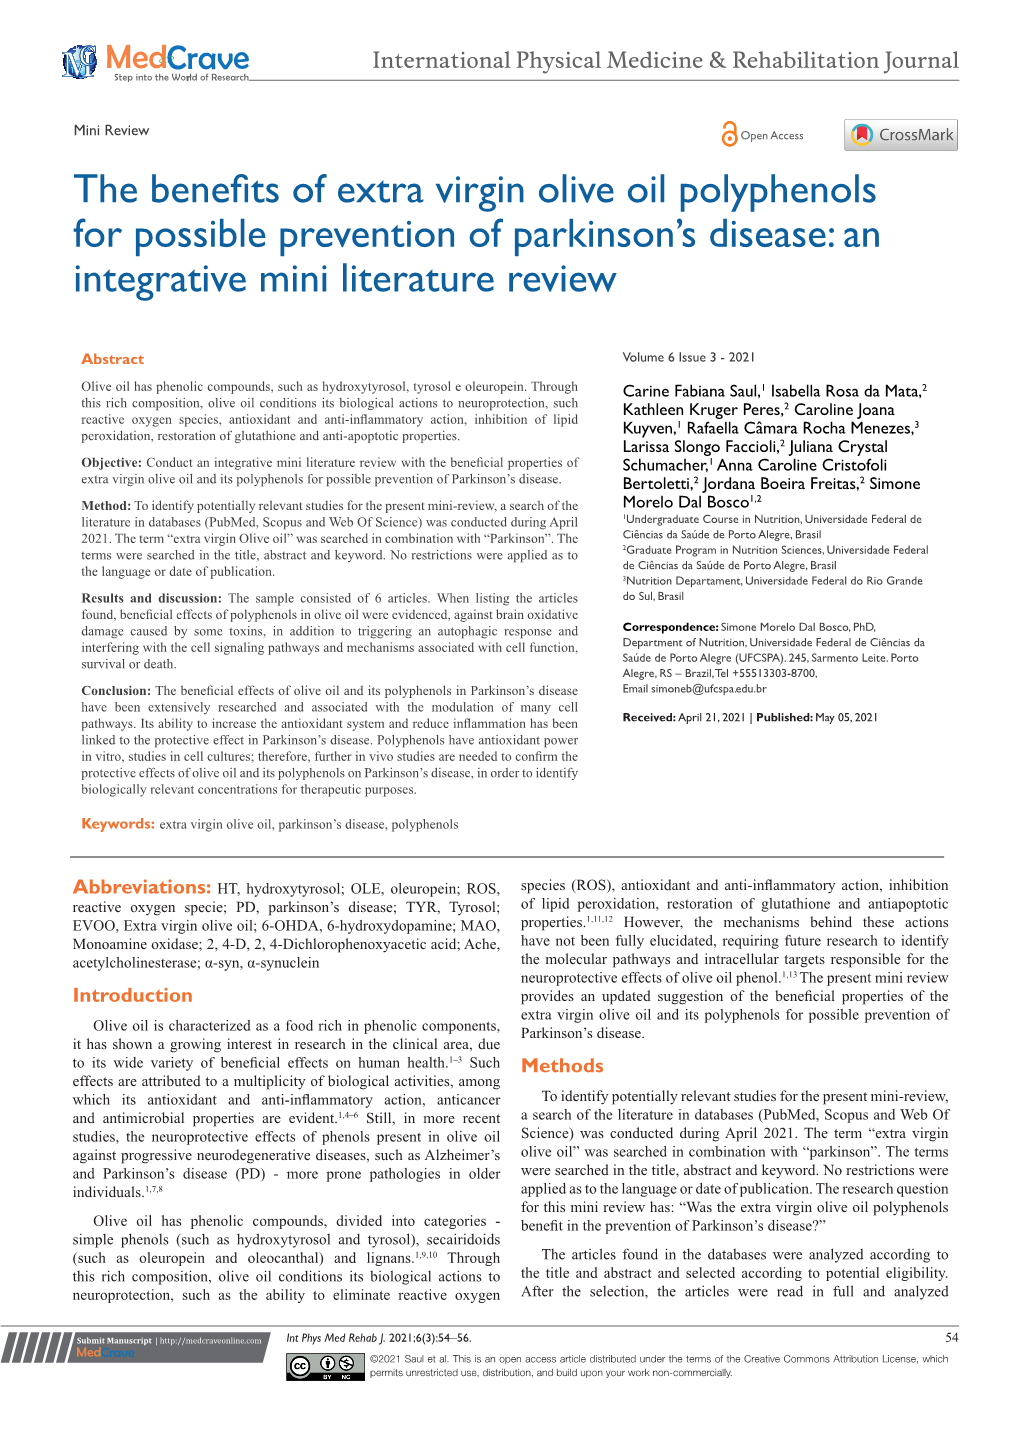 The Benefits of Extra Virgin Olive Oil Polyphenols for Possible Prevention of Parkinson’S Disease: an Integrative Mini Literature Review